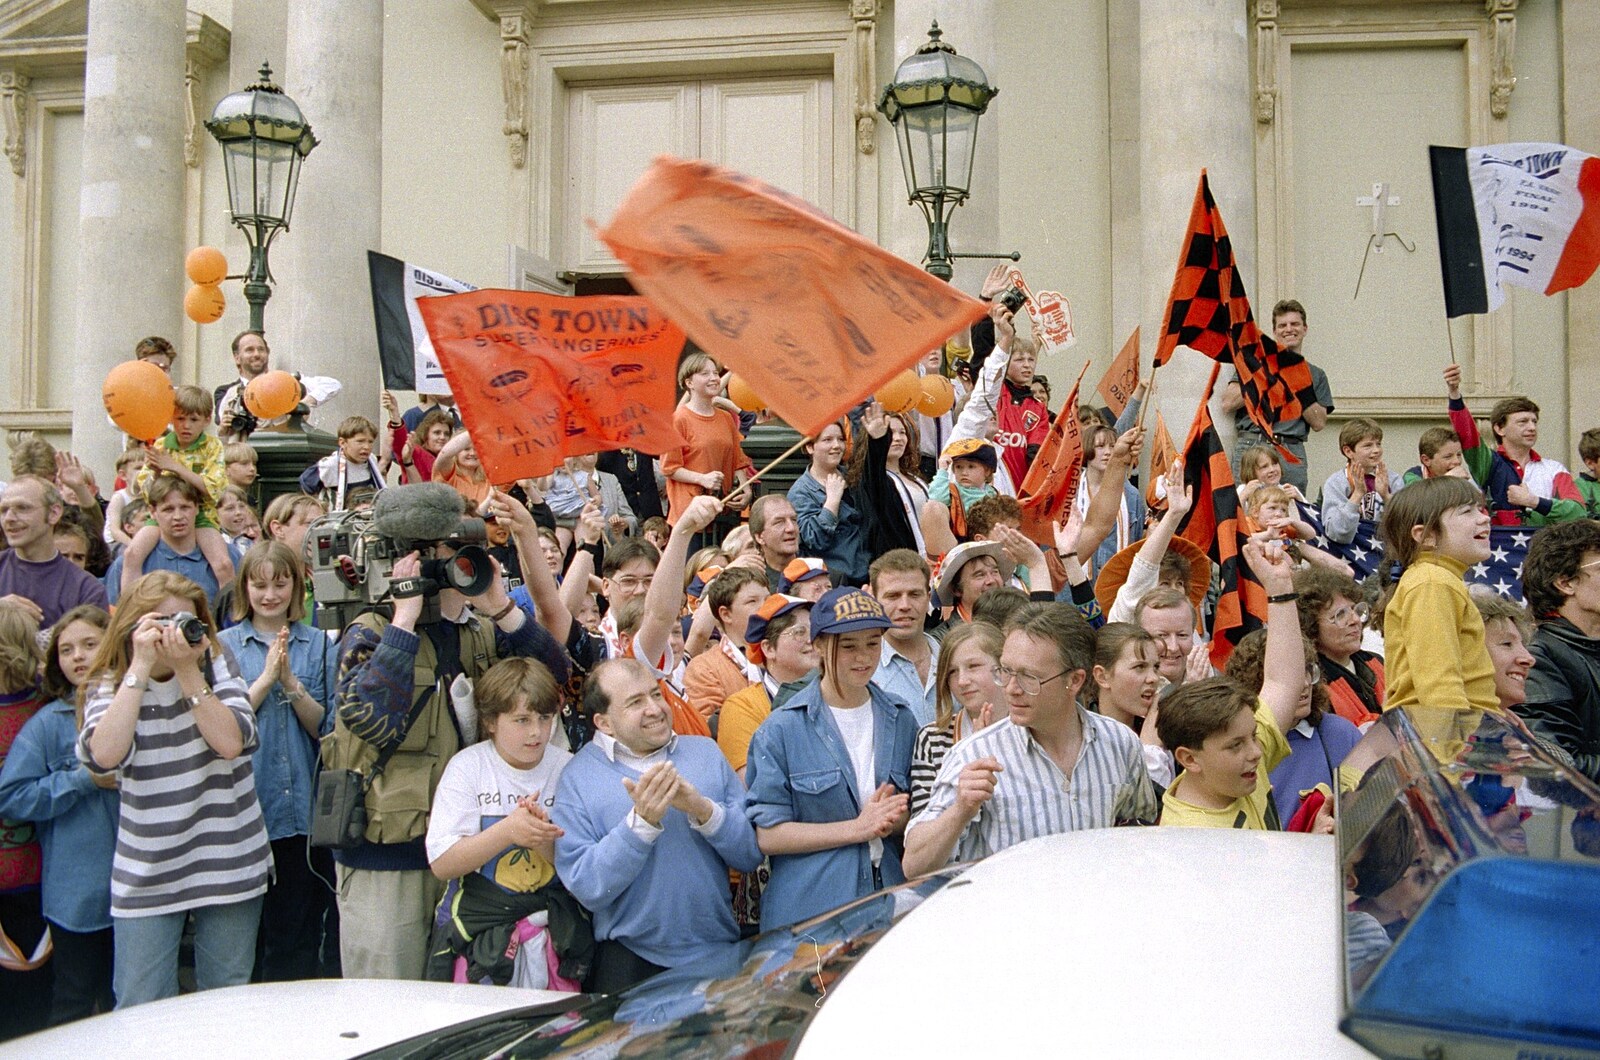 Orange flags are waved from Diss Town and the F.A. Vase Final, Diss and Wembley, Norfolk and London - 15th May 1994